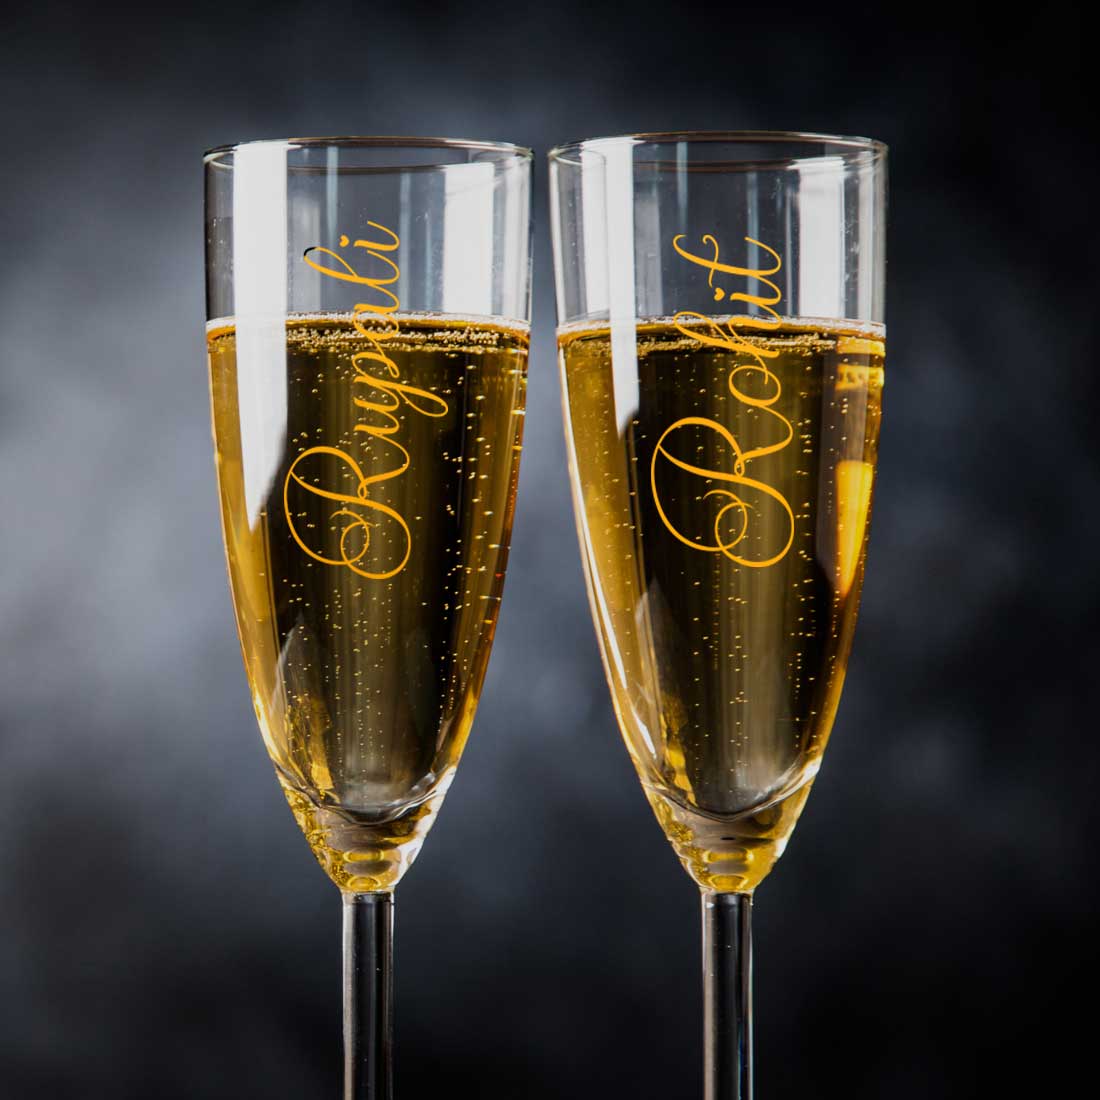 Customized Champagne Glasses With Name Anniversary Gift For Wife - Add Name